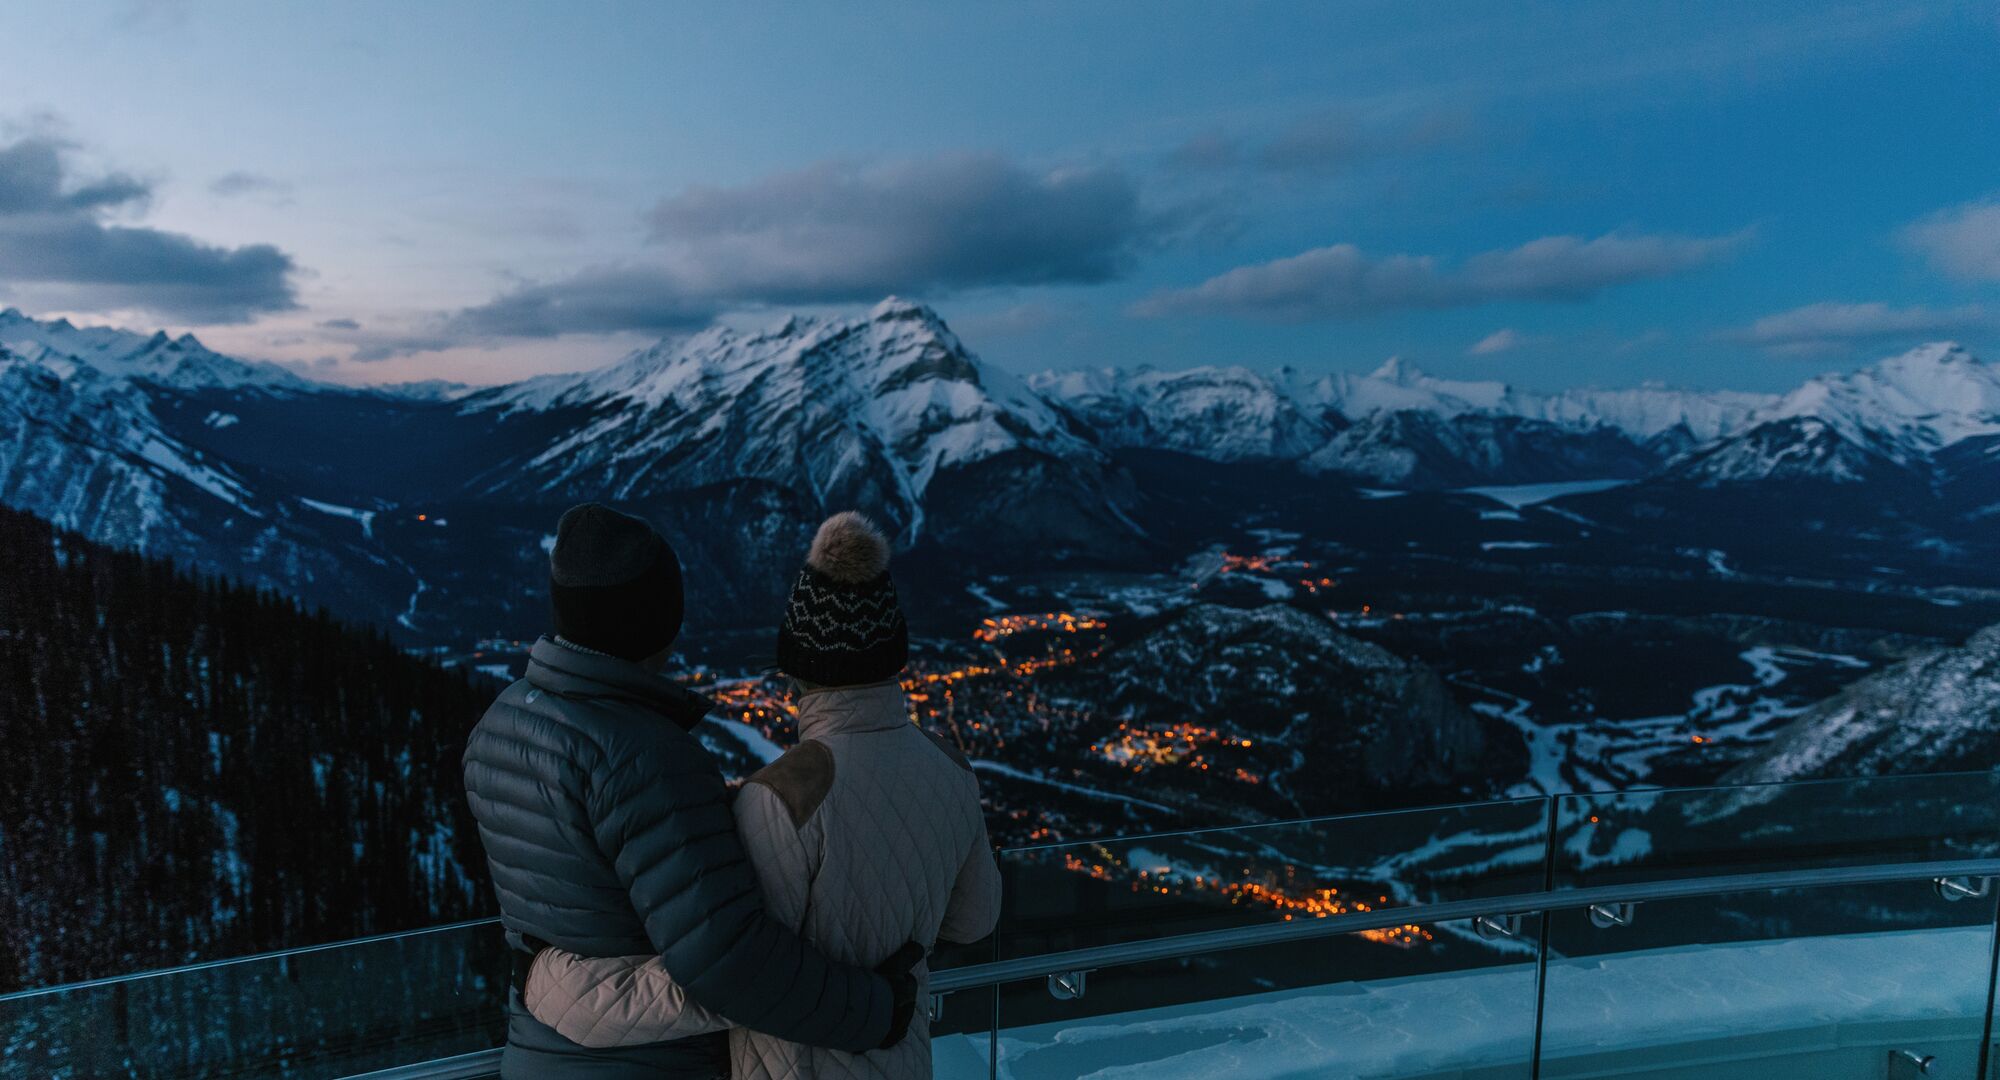 Couple overlooking the town of Banff from the top of the Banff Gondola on a cool winter evening